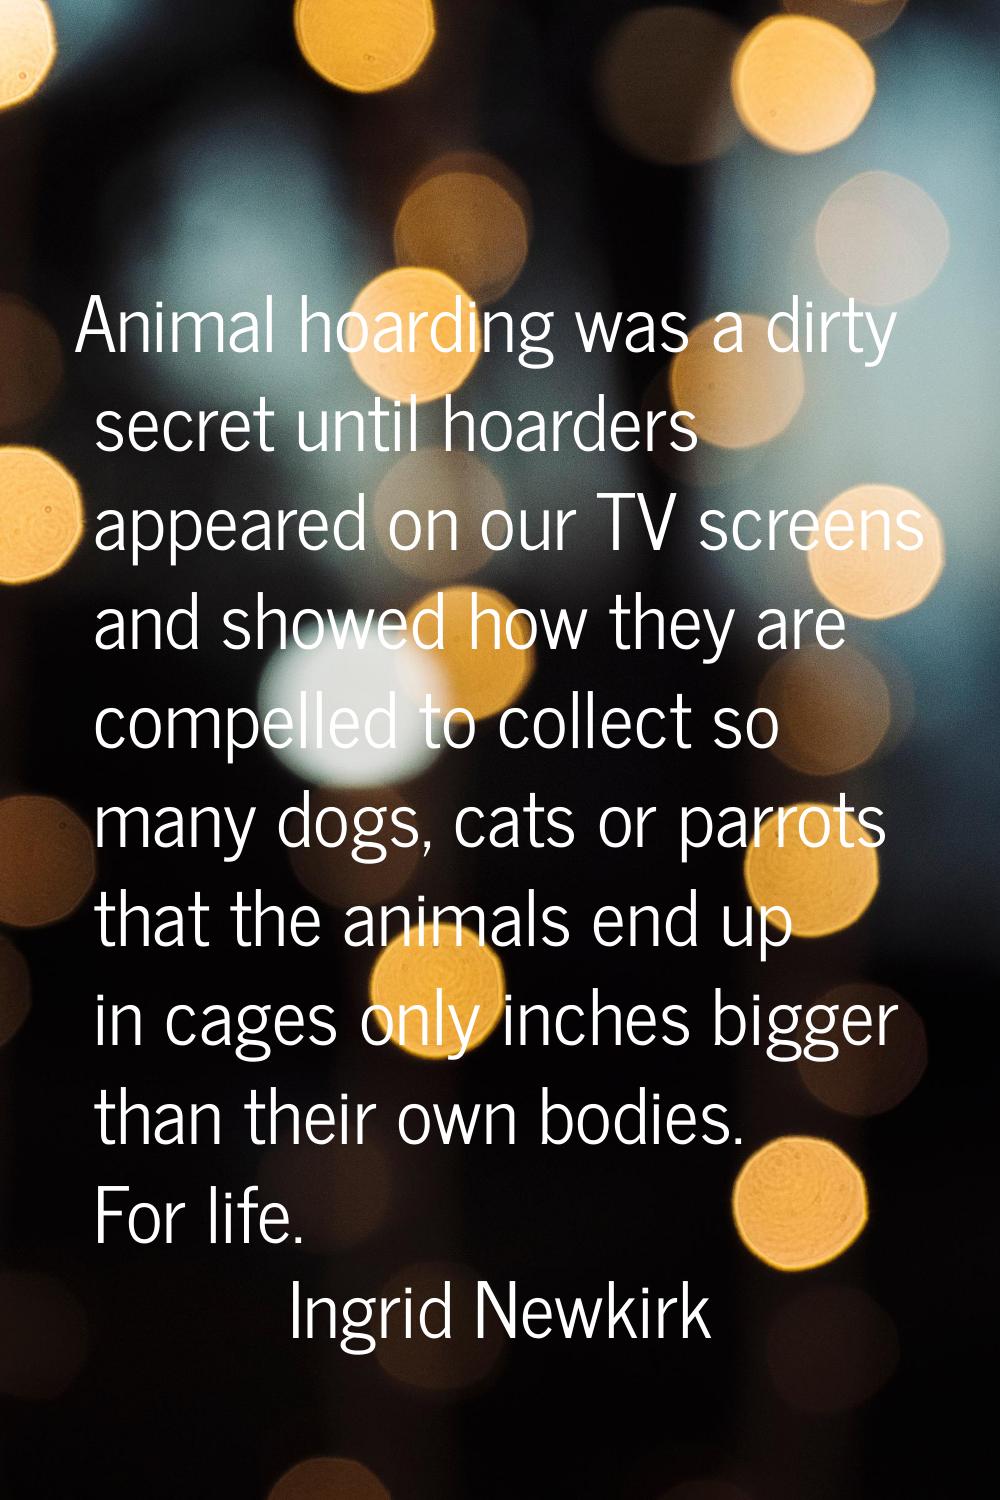 Animal hoarding was a dirty secret until hoarders appeared on our TV screens and showed how they ar